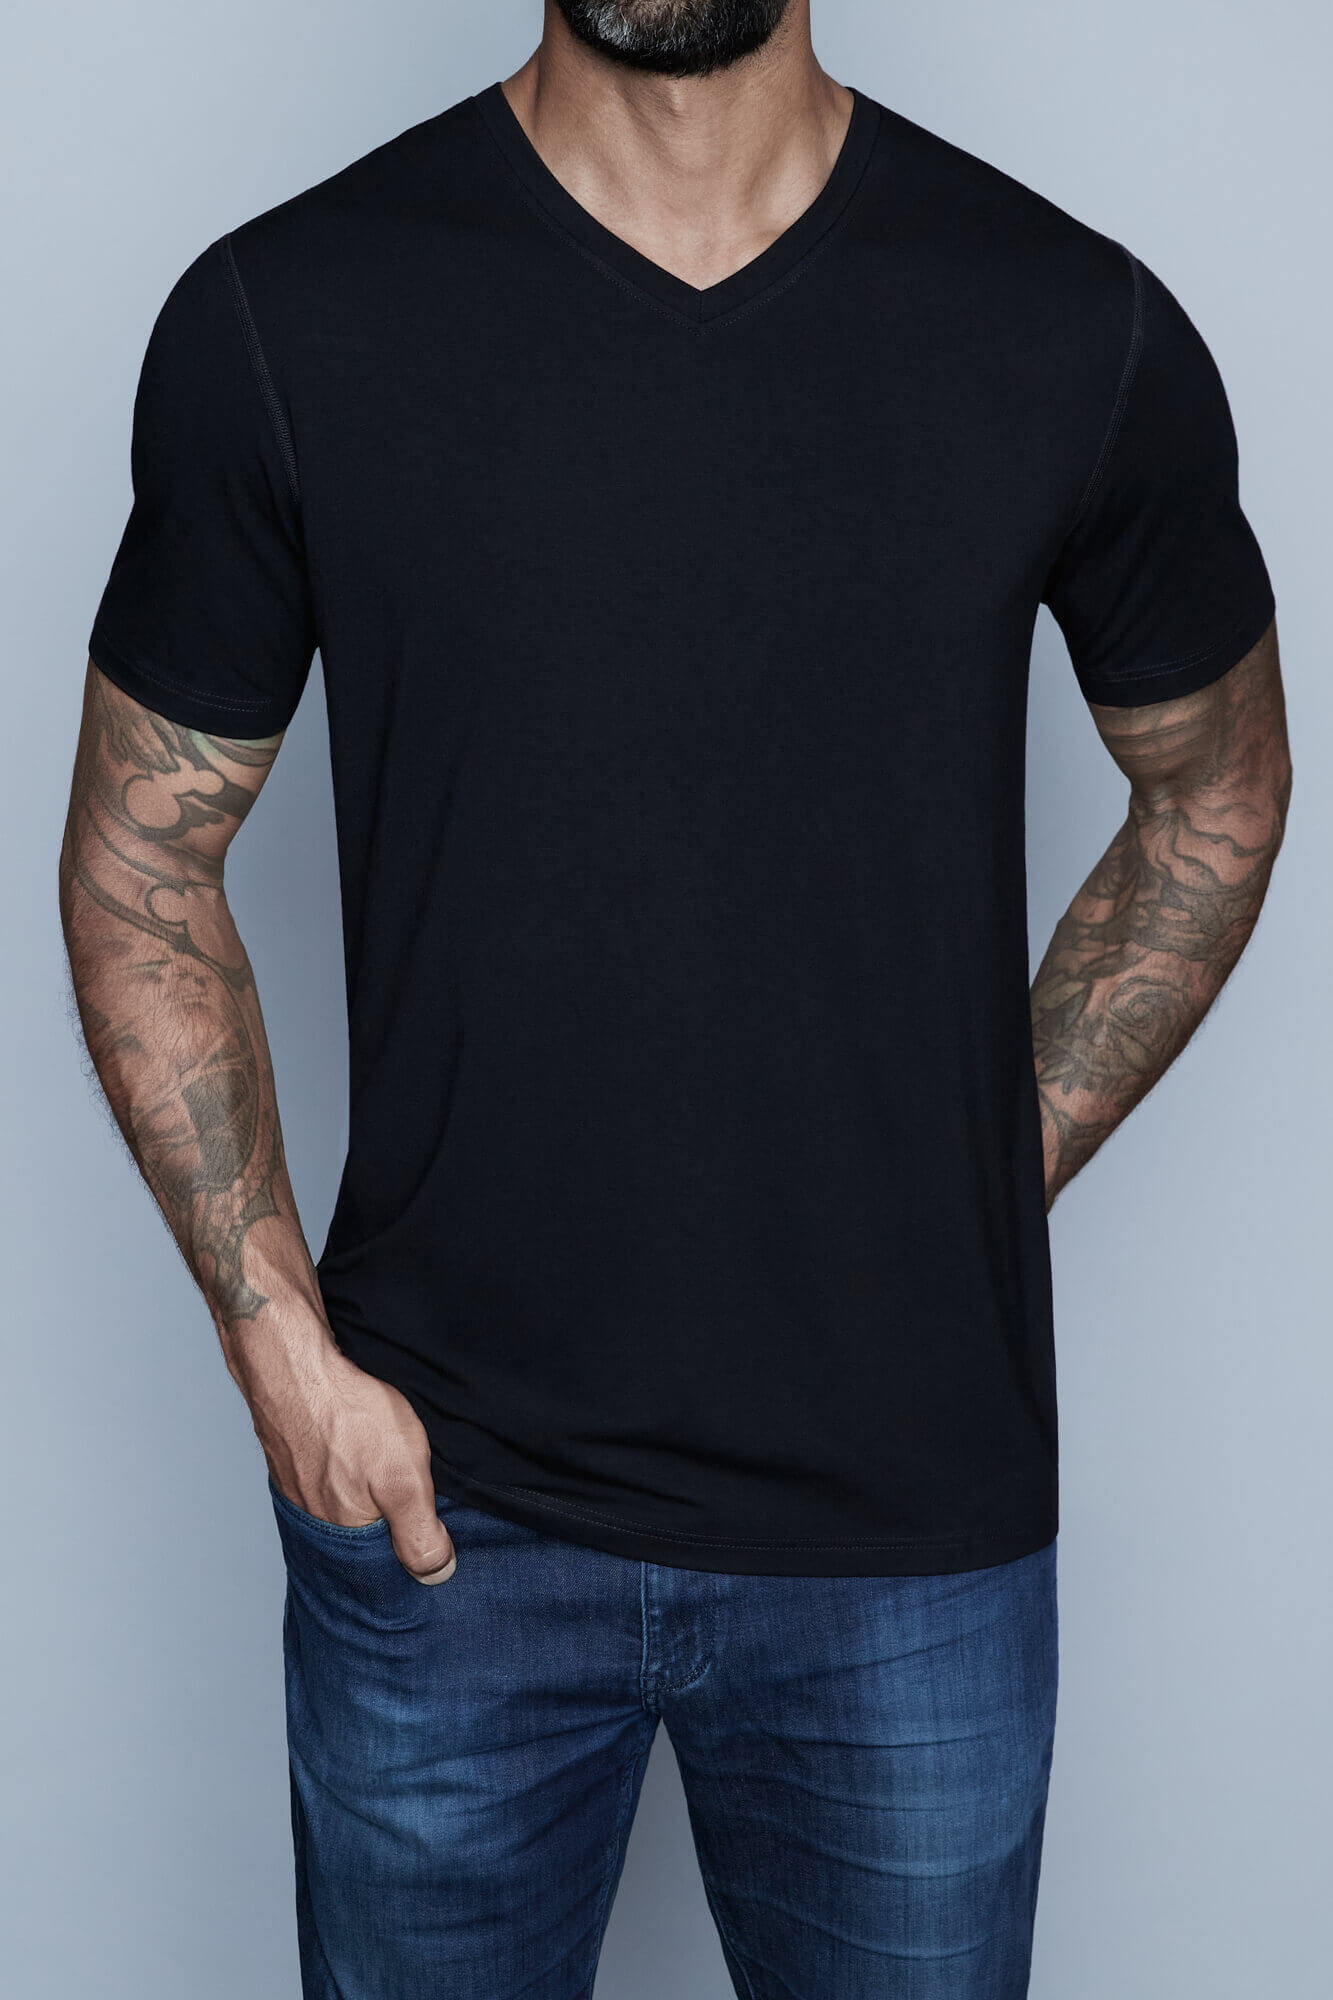 Mens tall v neck t shirts in black by Navas Lab Apparel. Tall tees for tall guys for everyday use.